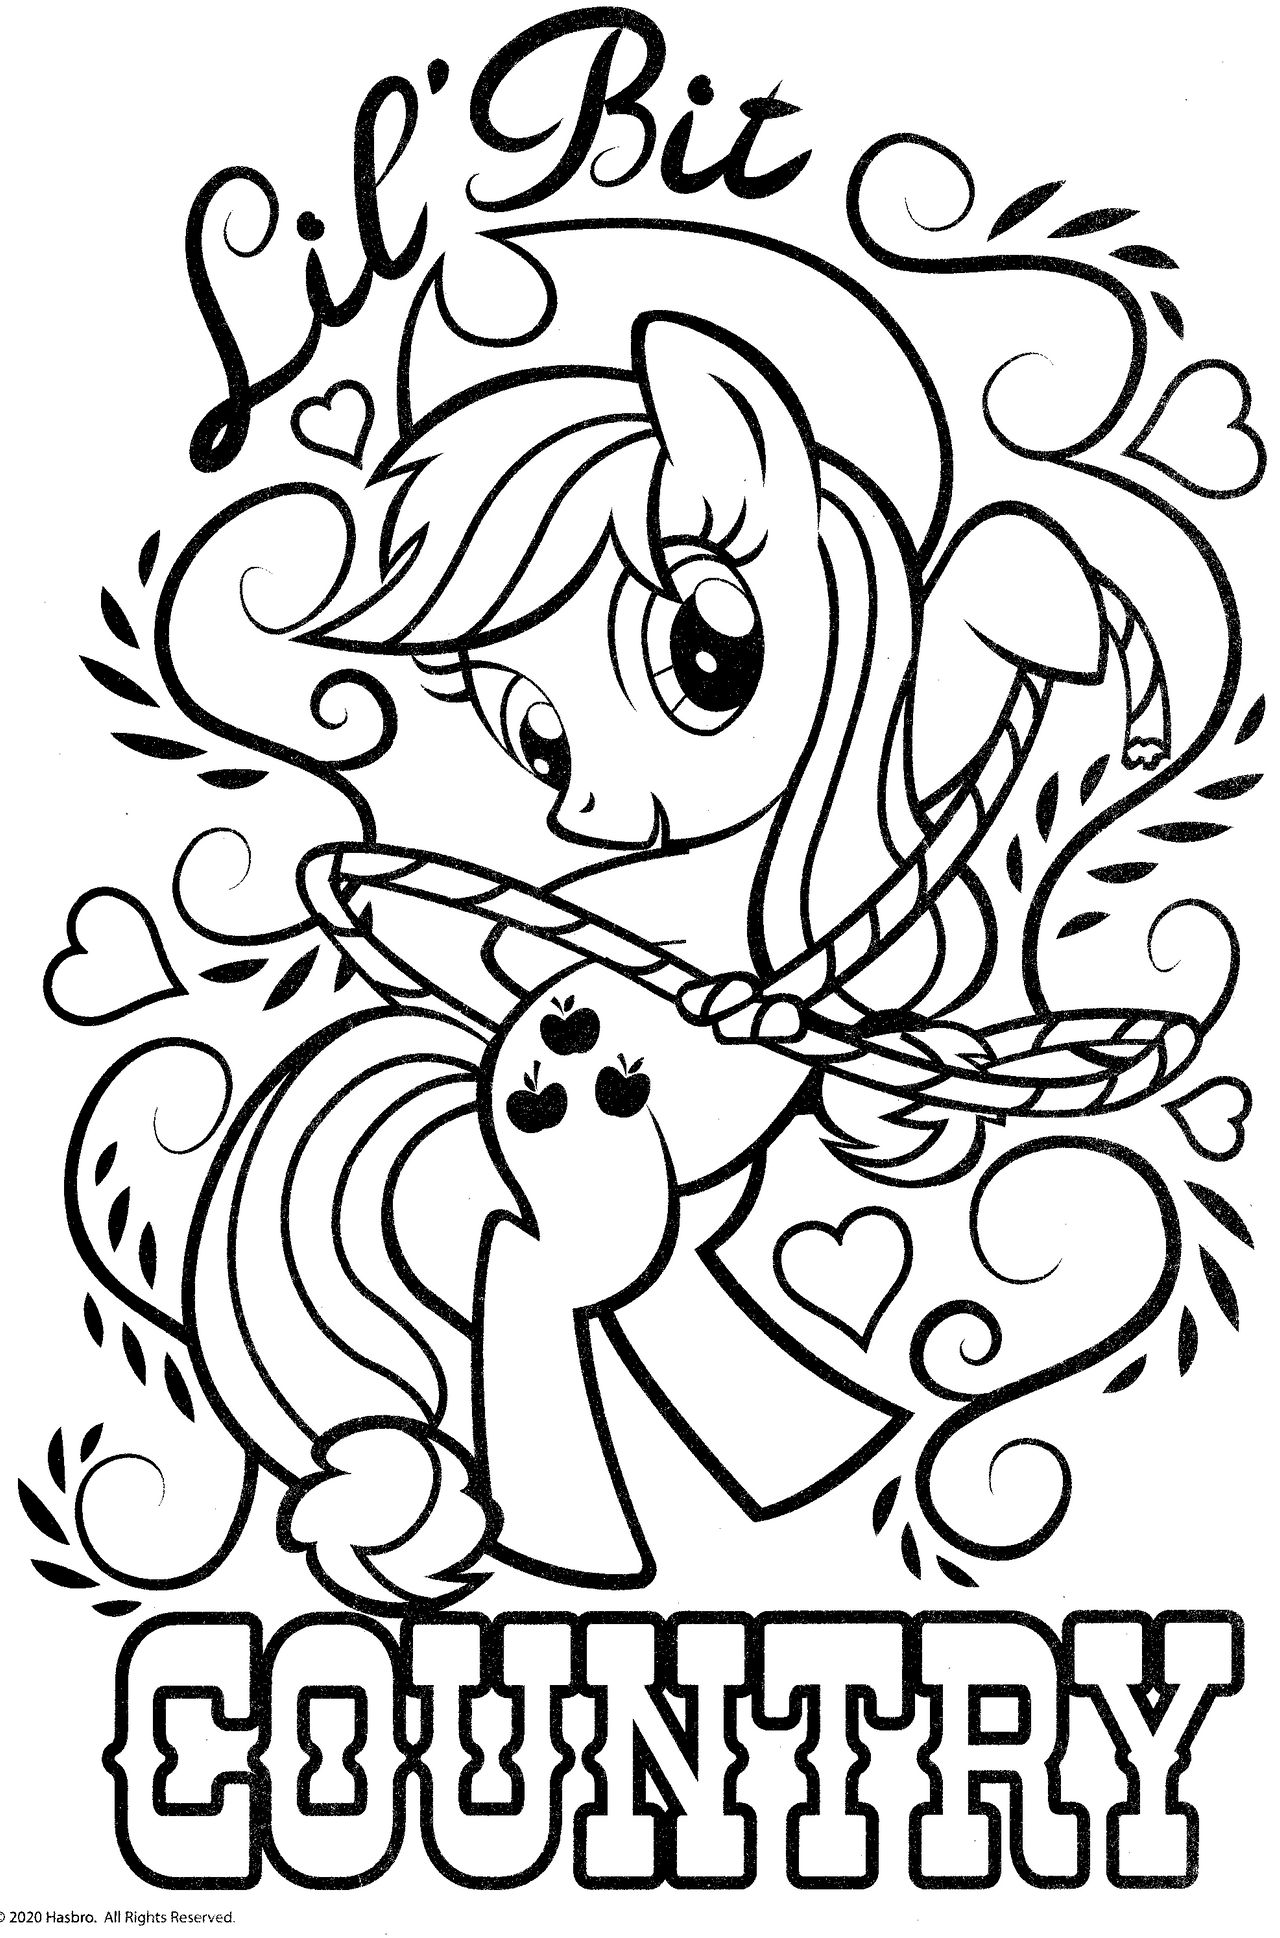 024 MLP My Little Pony coloring page by magnificent-coloring on DeviantArt